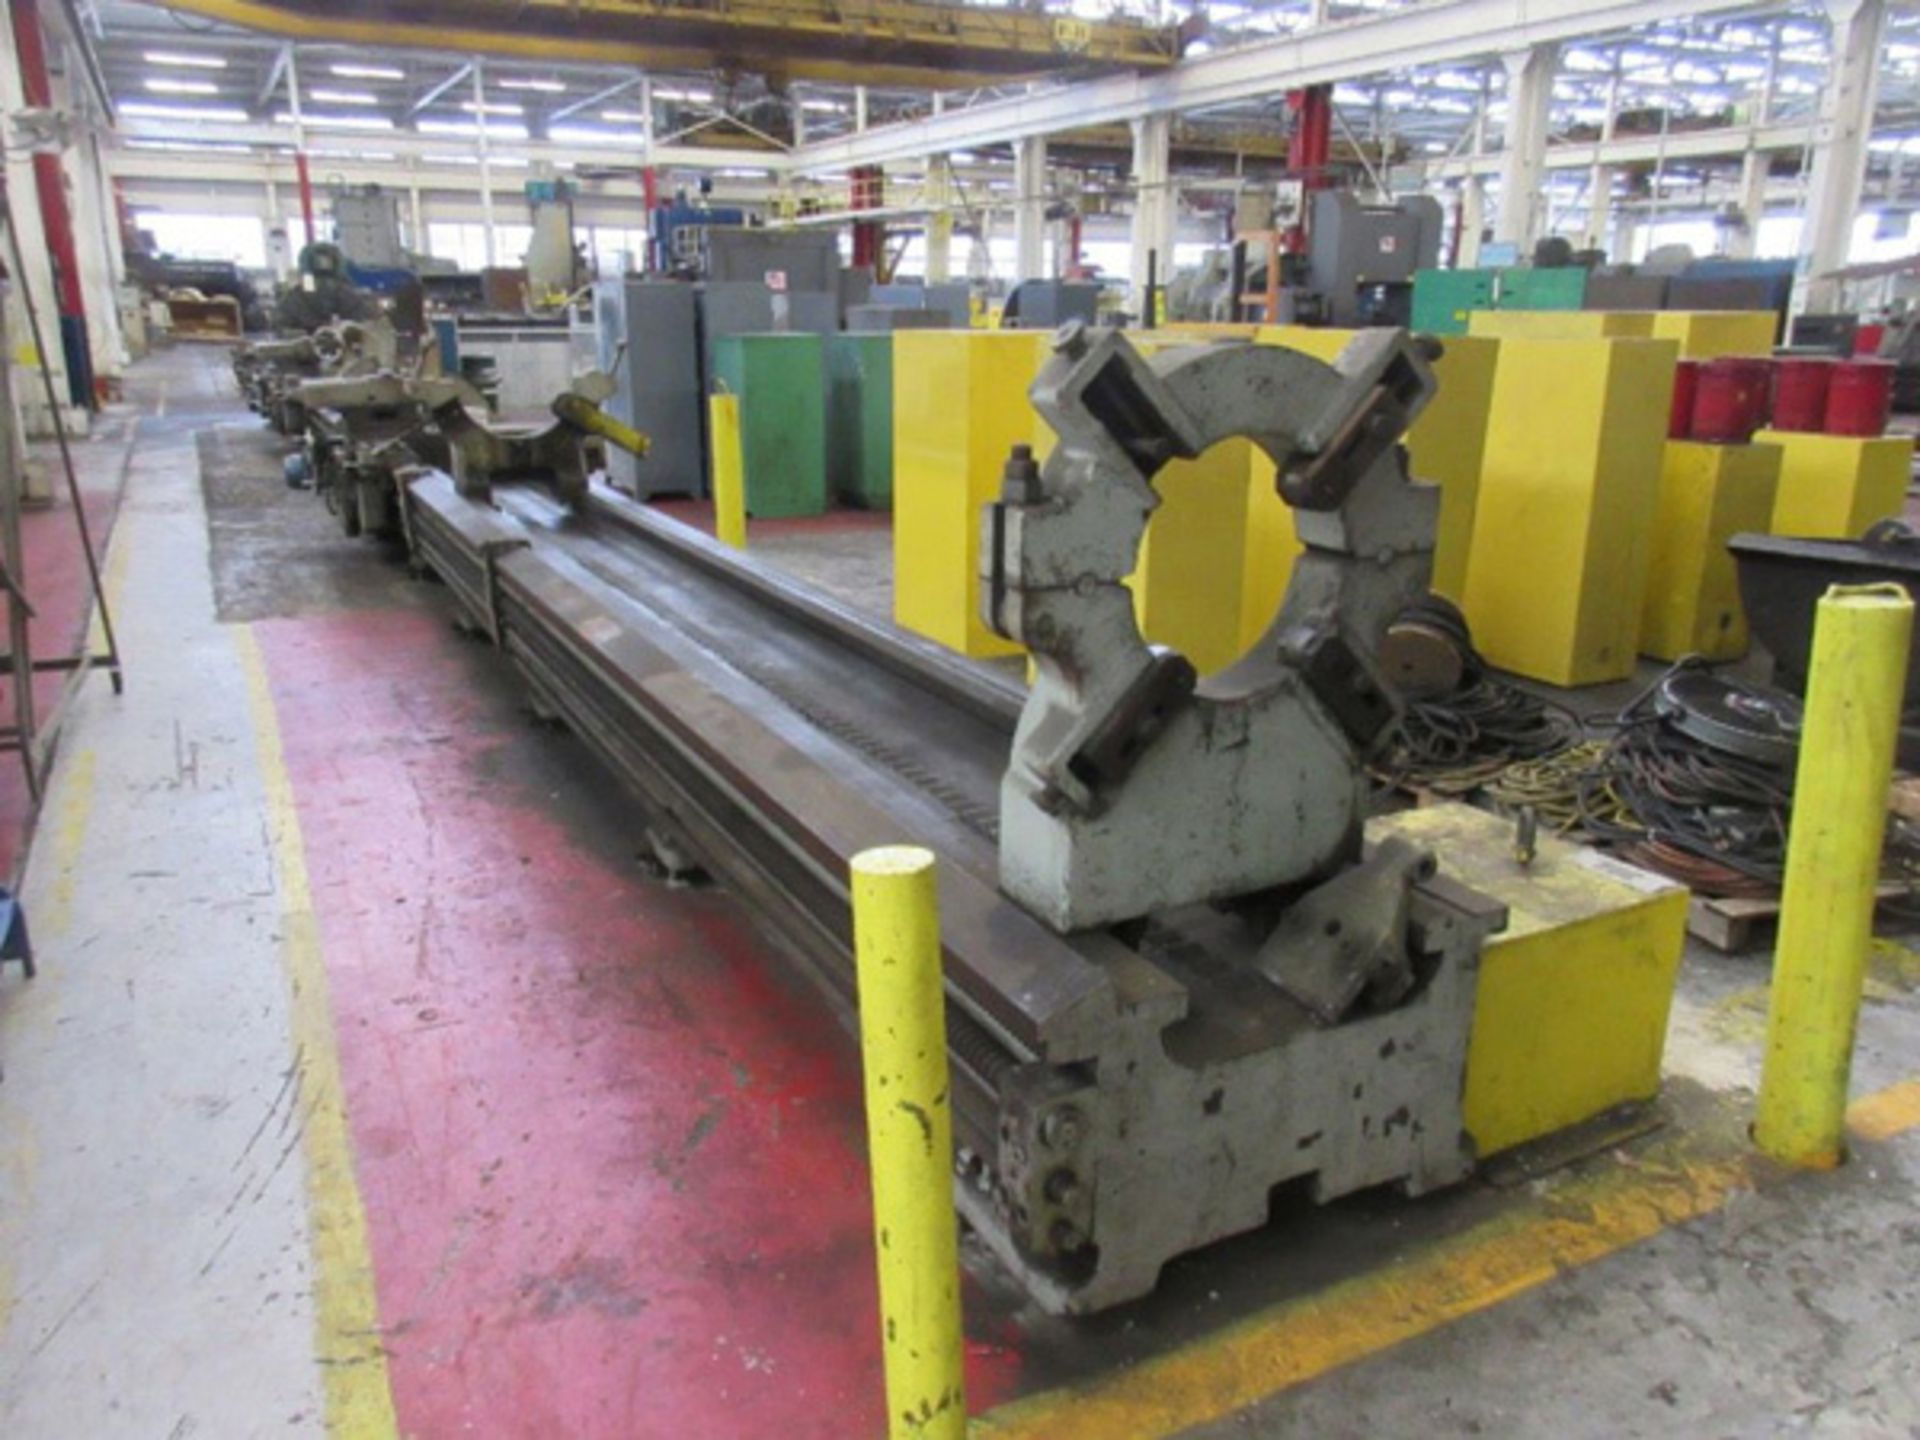 Leblond Dual Carriage Heavy Duty Engine Lathe 52" x 58', Mdl: NR50X58, S/N: NR33, Located In: - Image 7 of 8